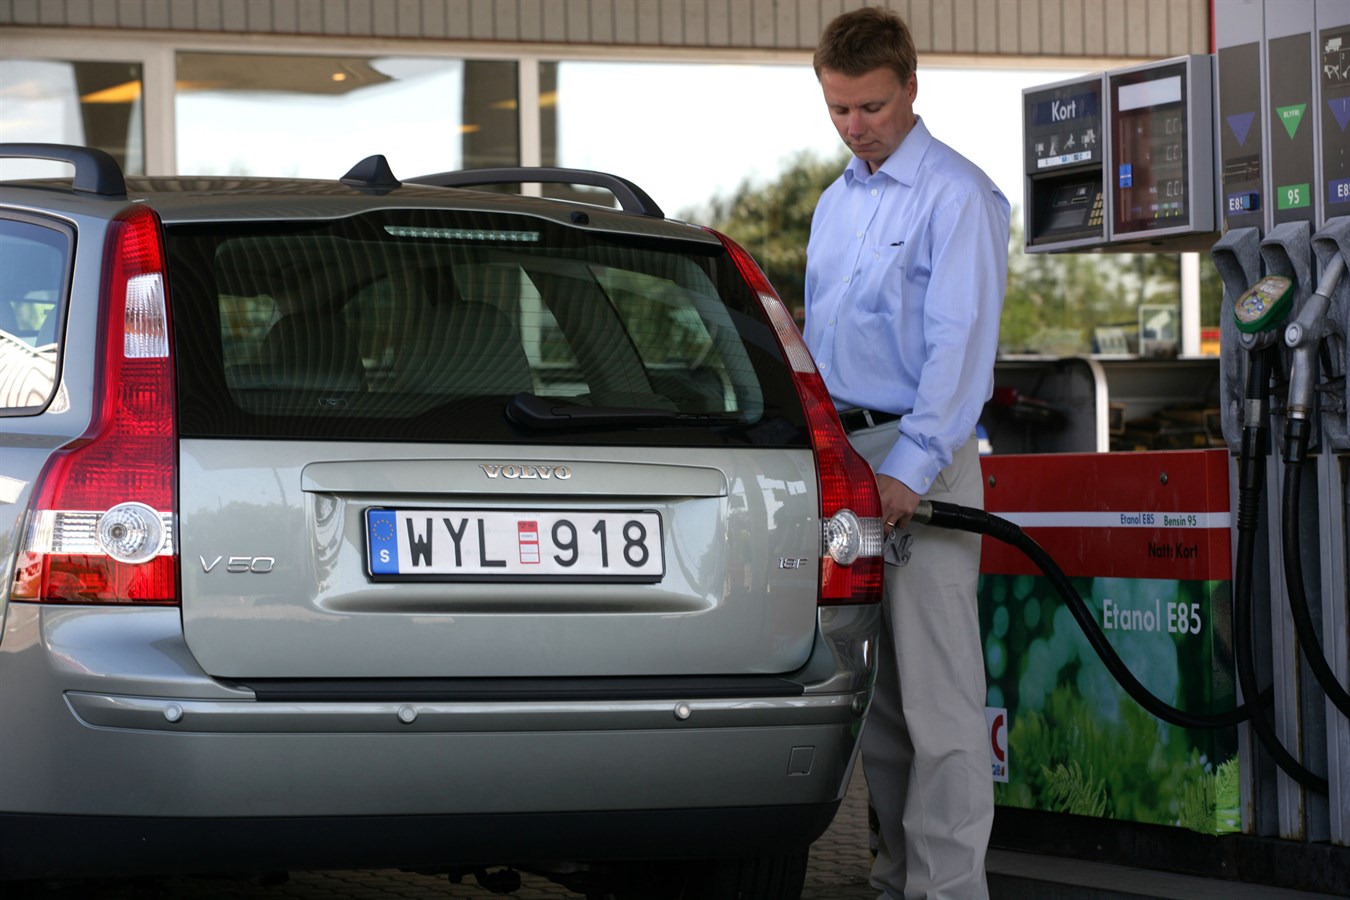 V50 FlexiFuel, fill up with E85 (85% bioethanol and 15% petrol) (available in Sweden)